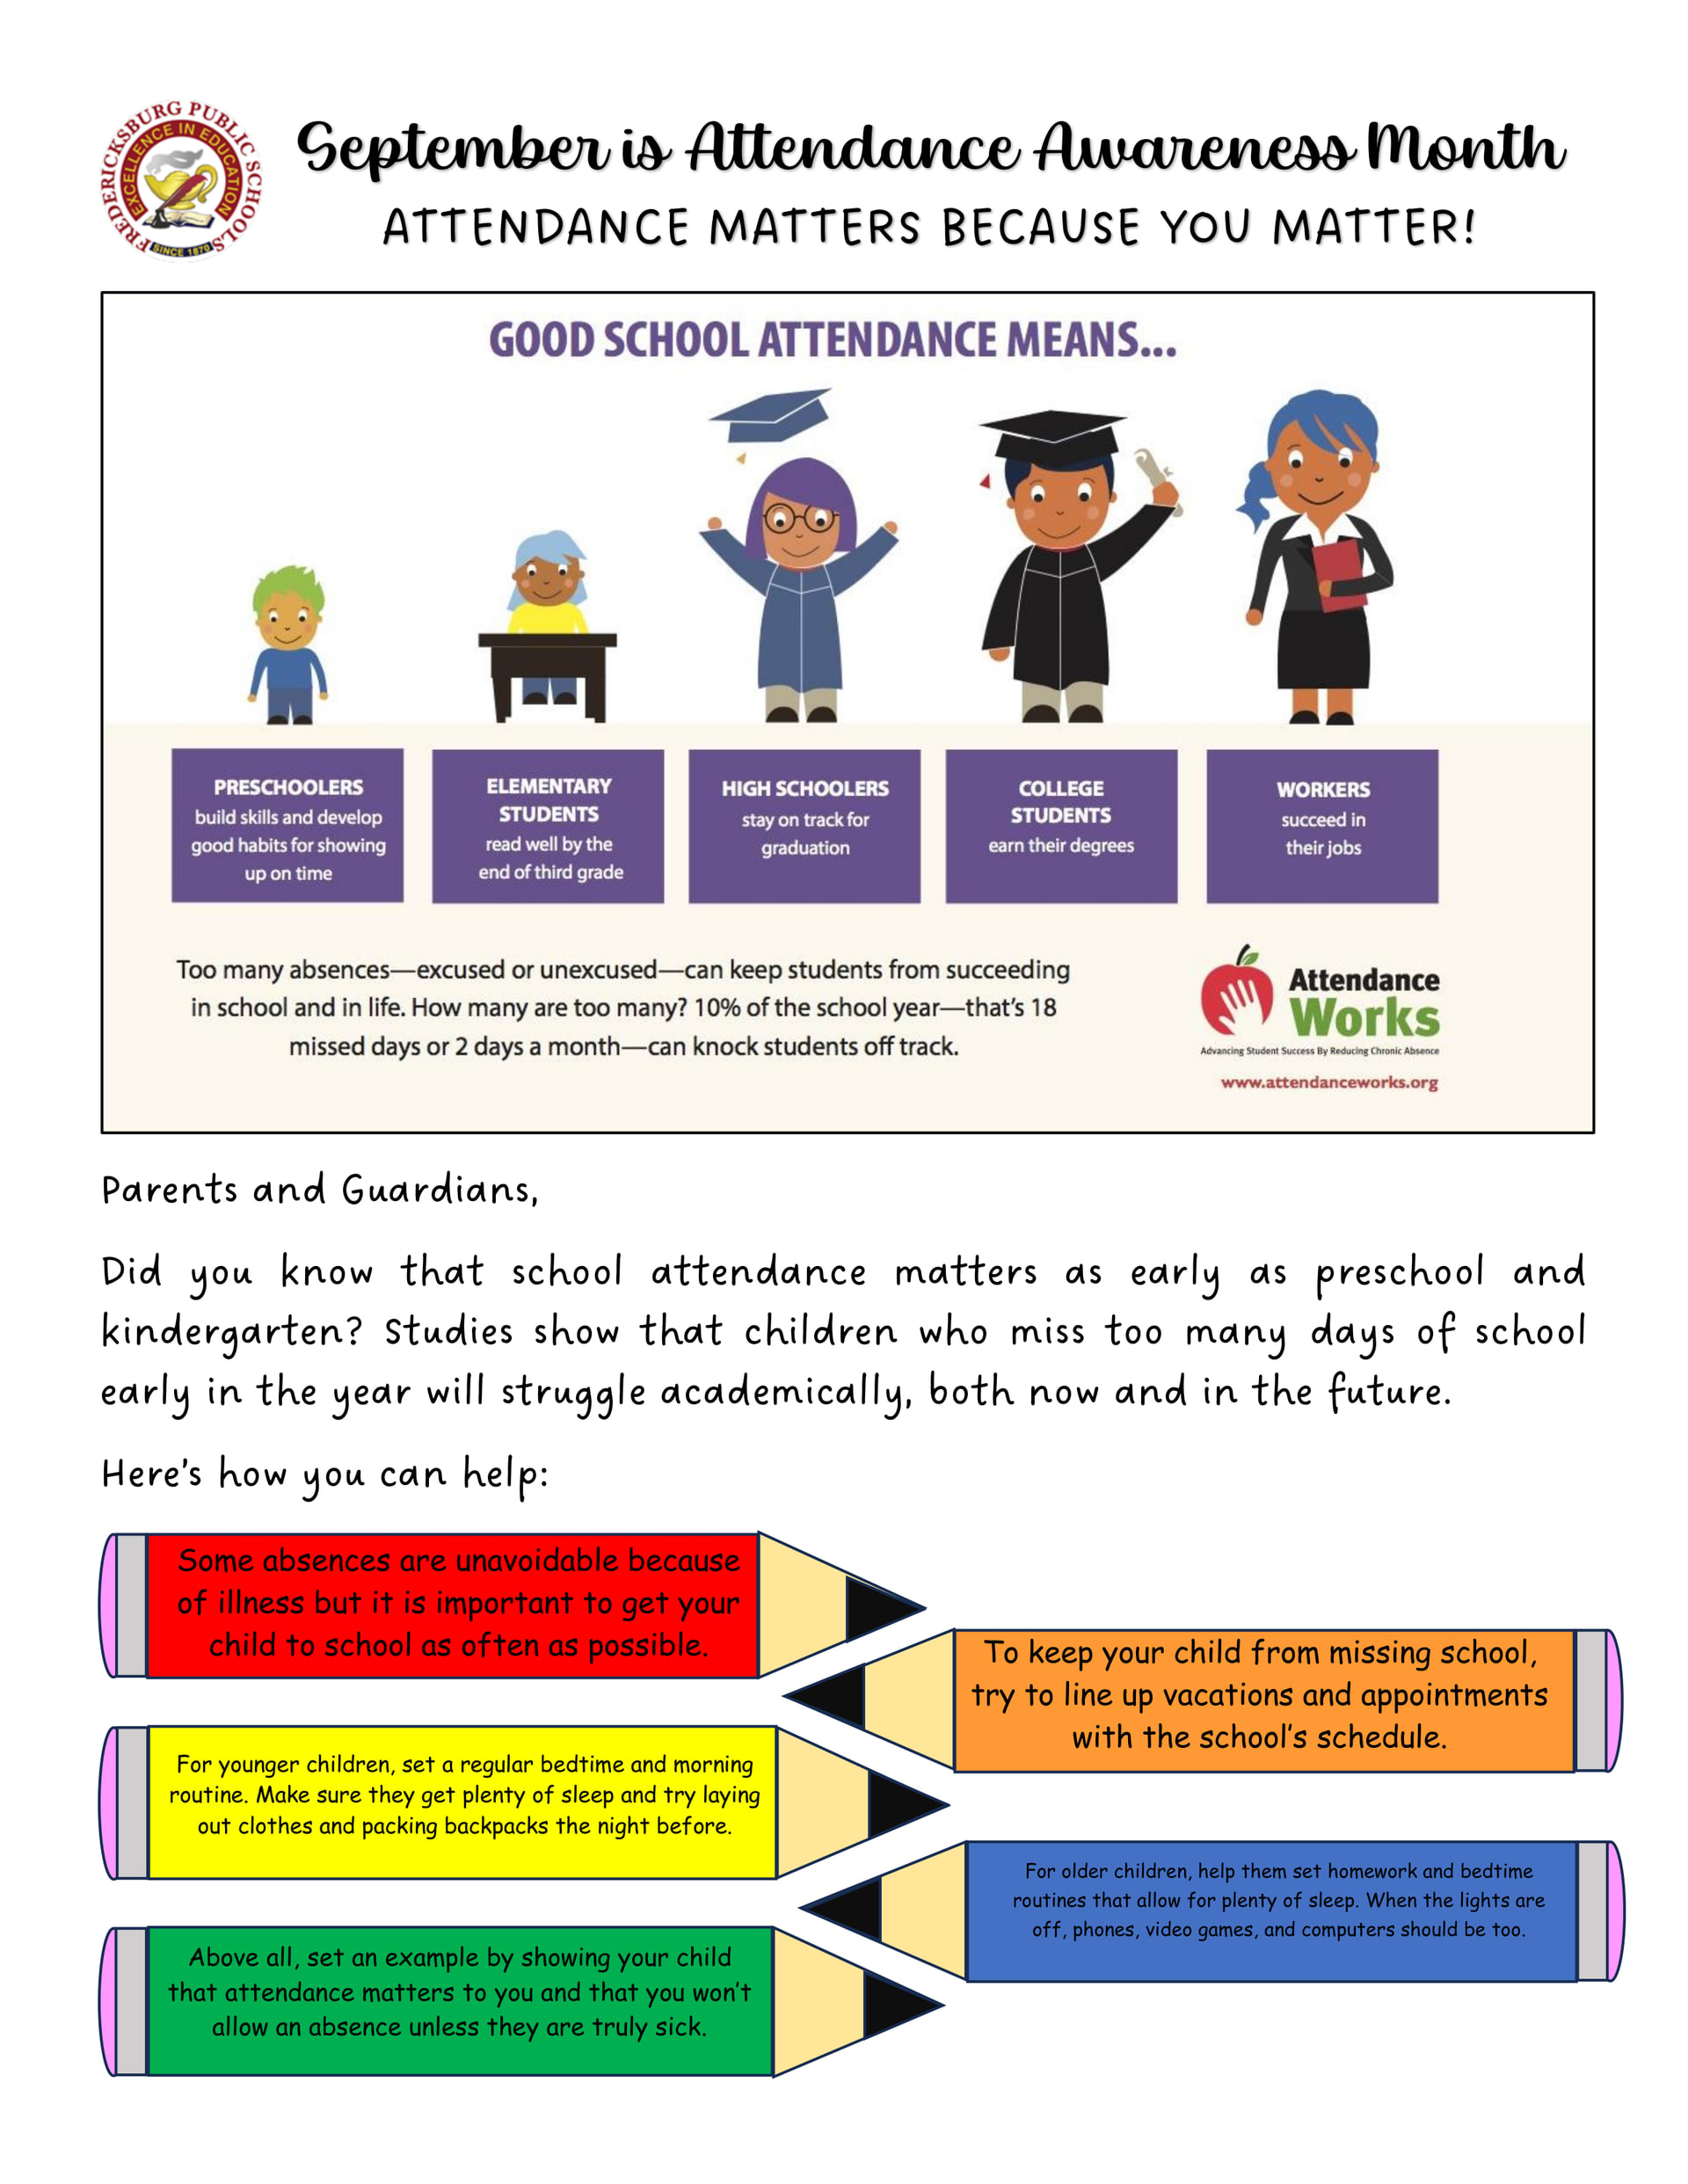 Need a full transcription of this flyer on attendance awareness for your screen reader? Click the image to visit our website.